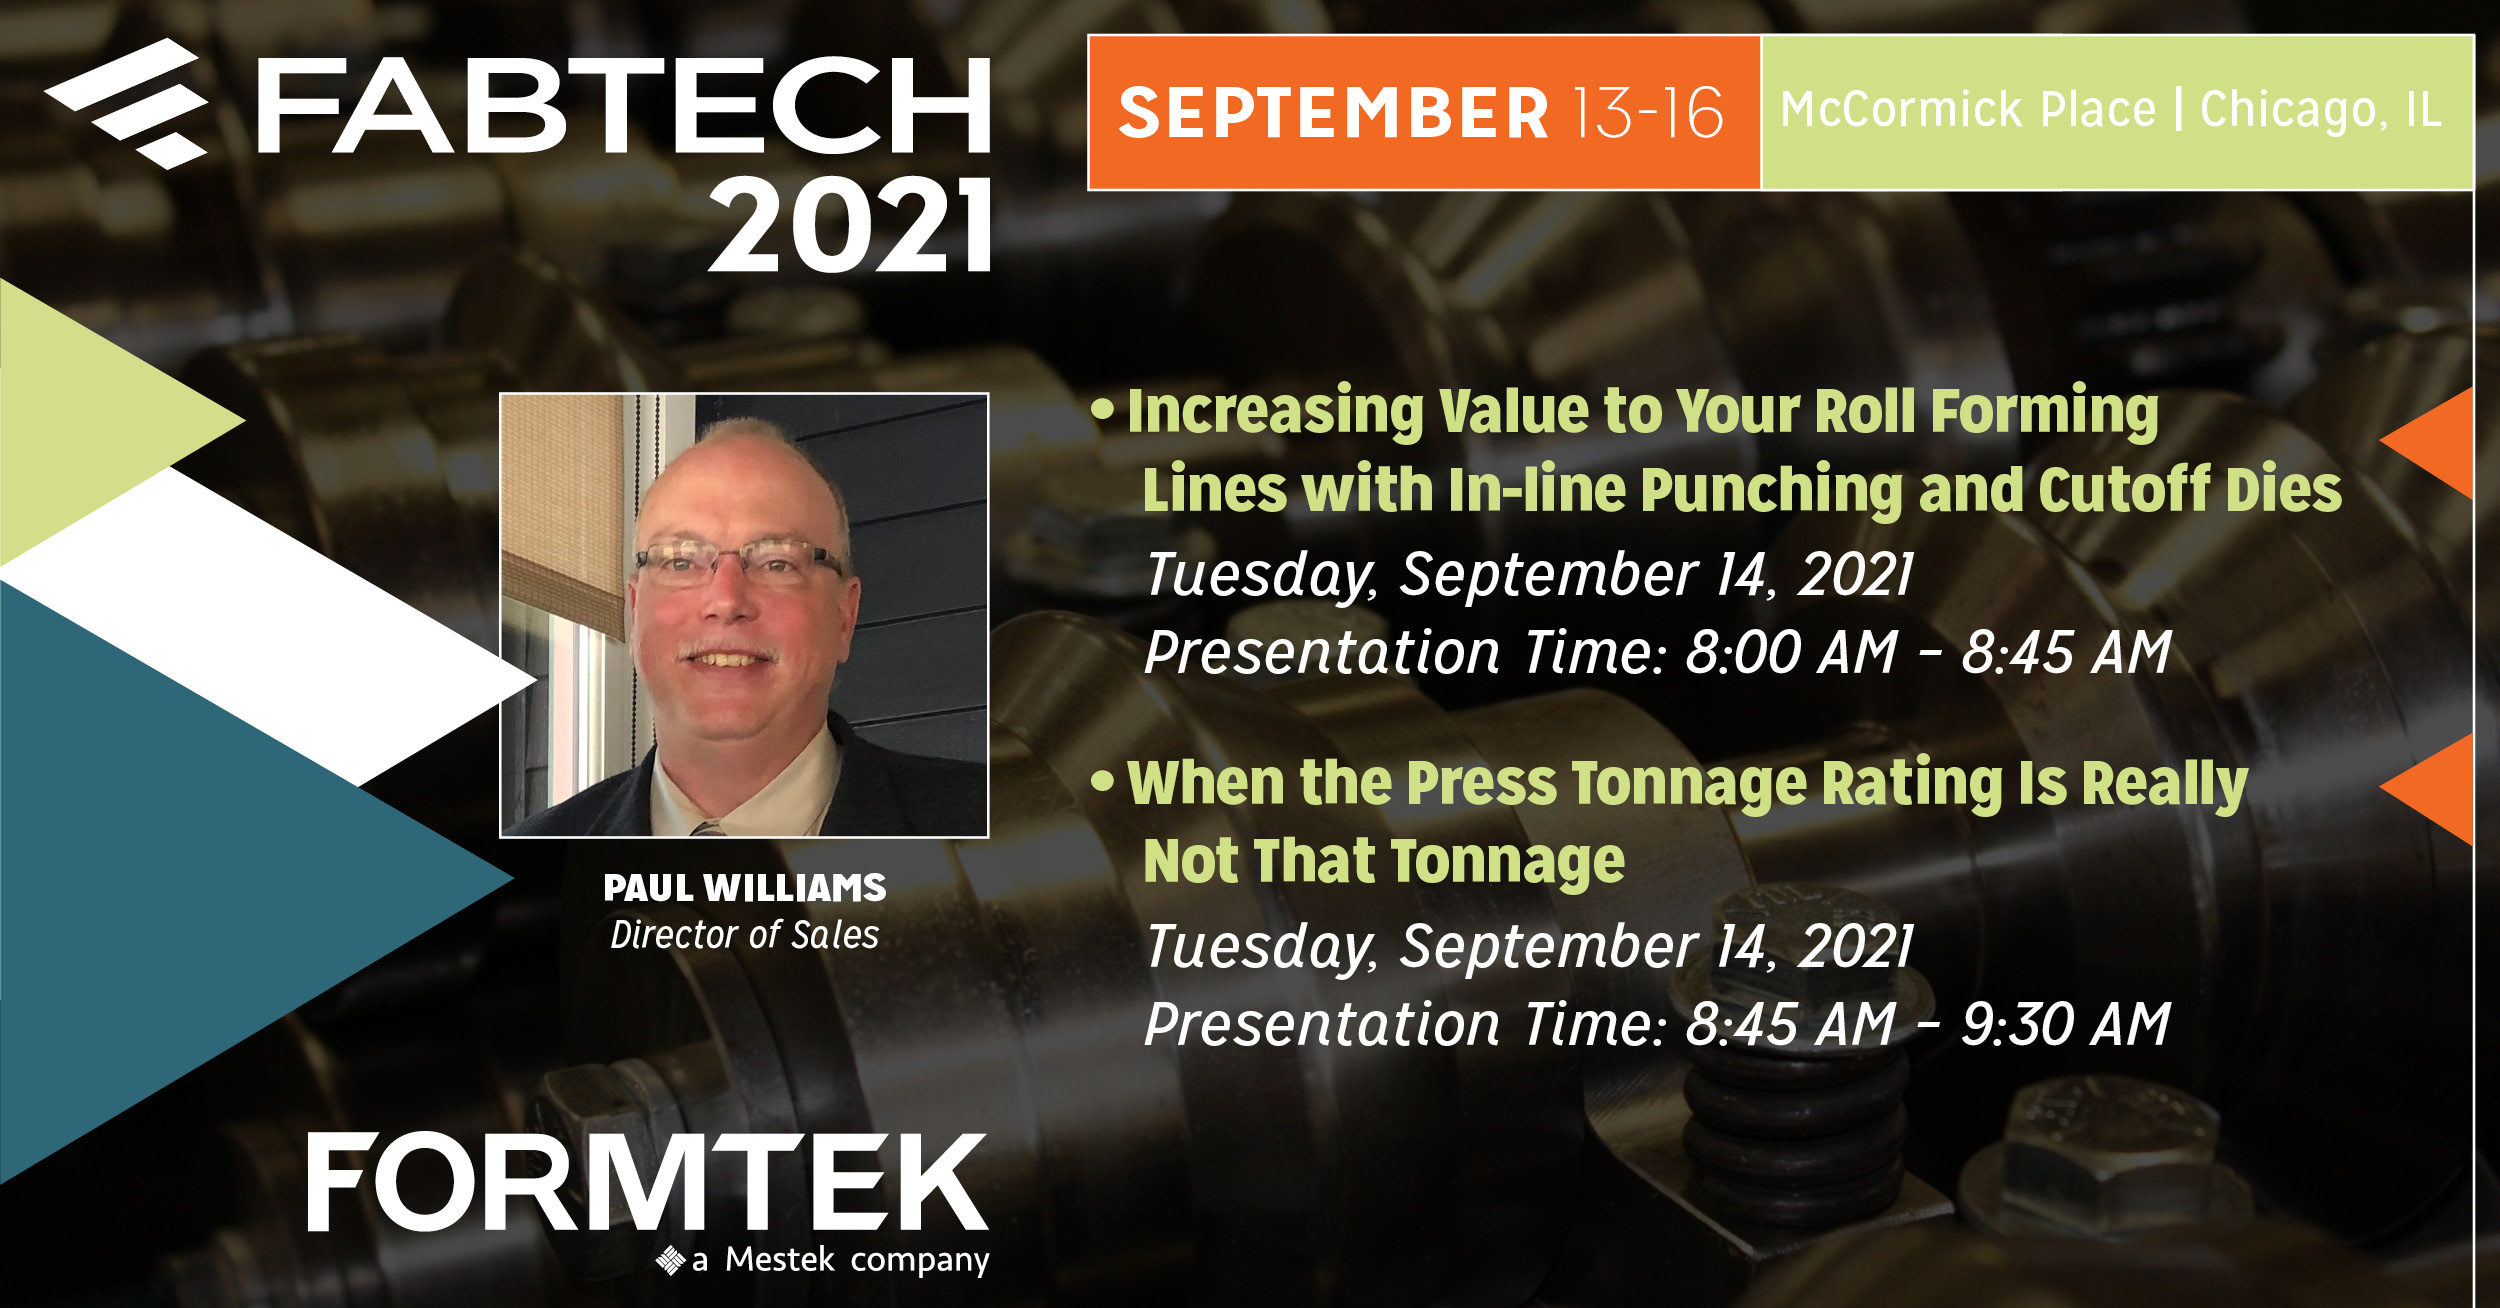 Paul Williams to Speak at FABTECH 2021